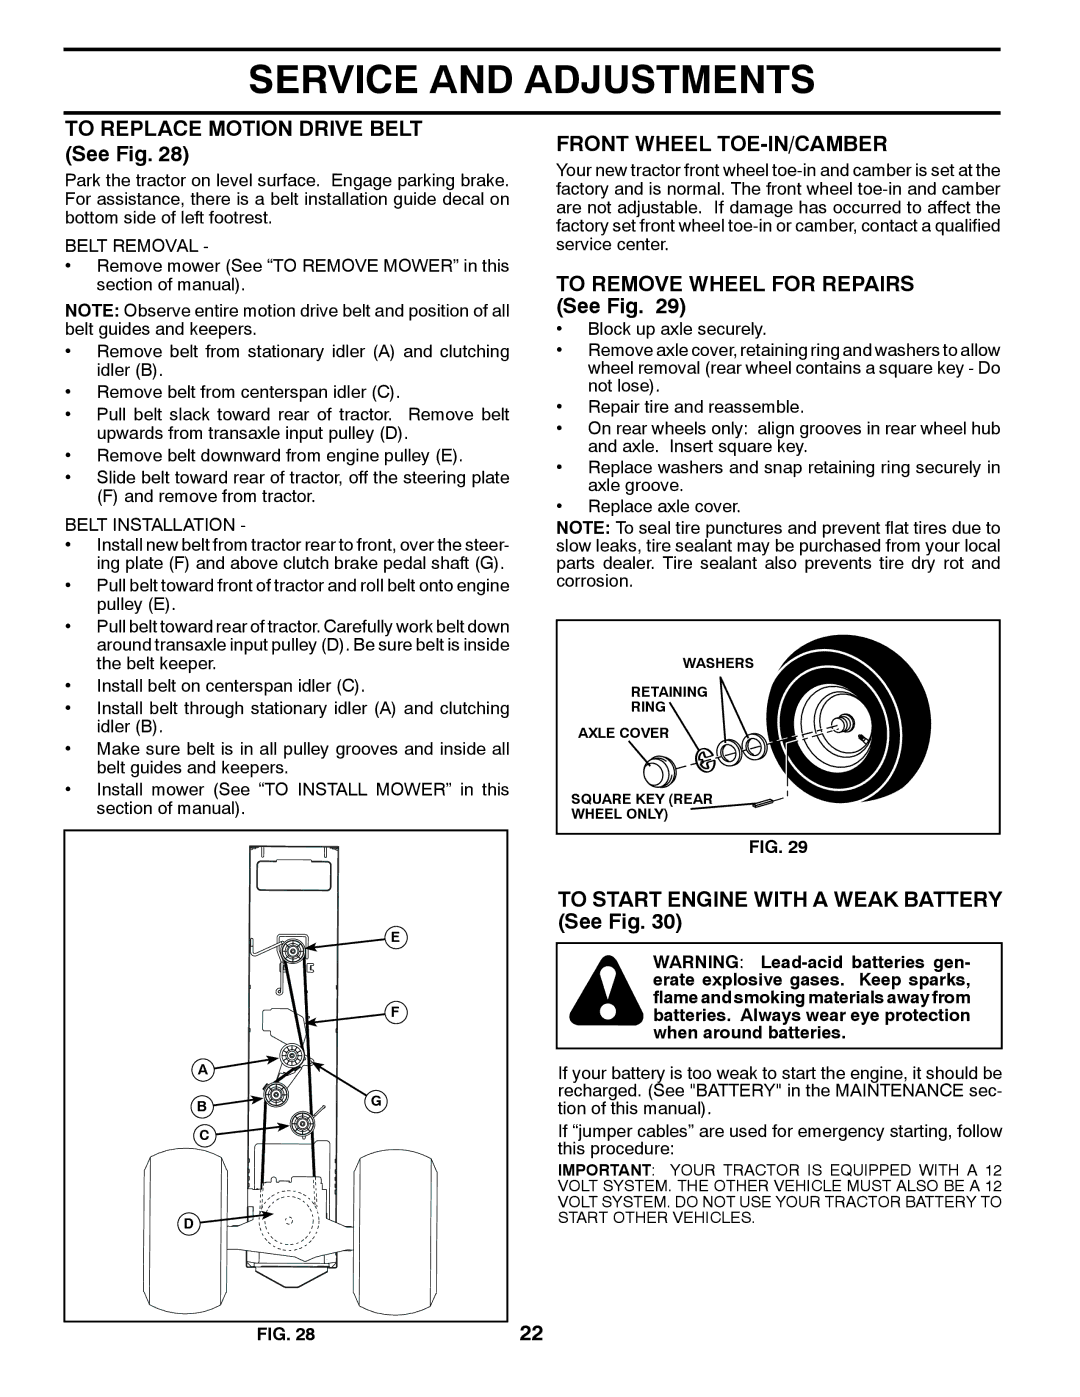 Poulan 411259 manual To Replace Motion Drive Belt See Fig, Front Wheel TOE-IN/CAMBER, To Remove Wheel for Repairs See Fig 